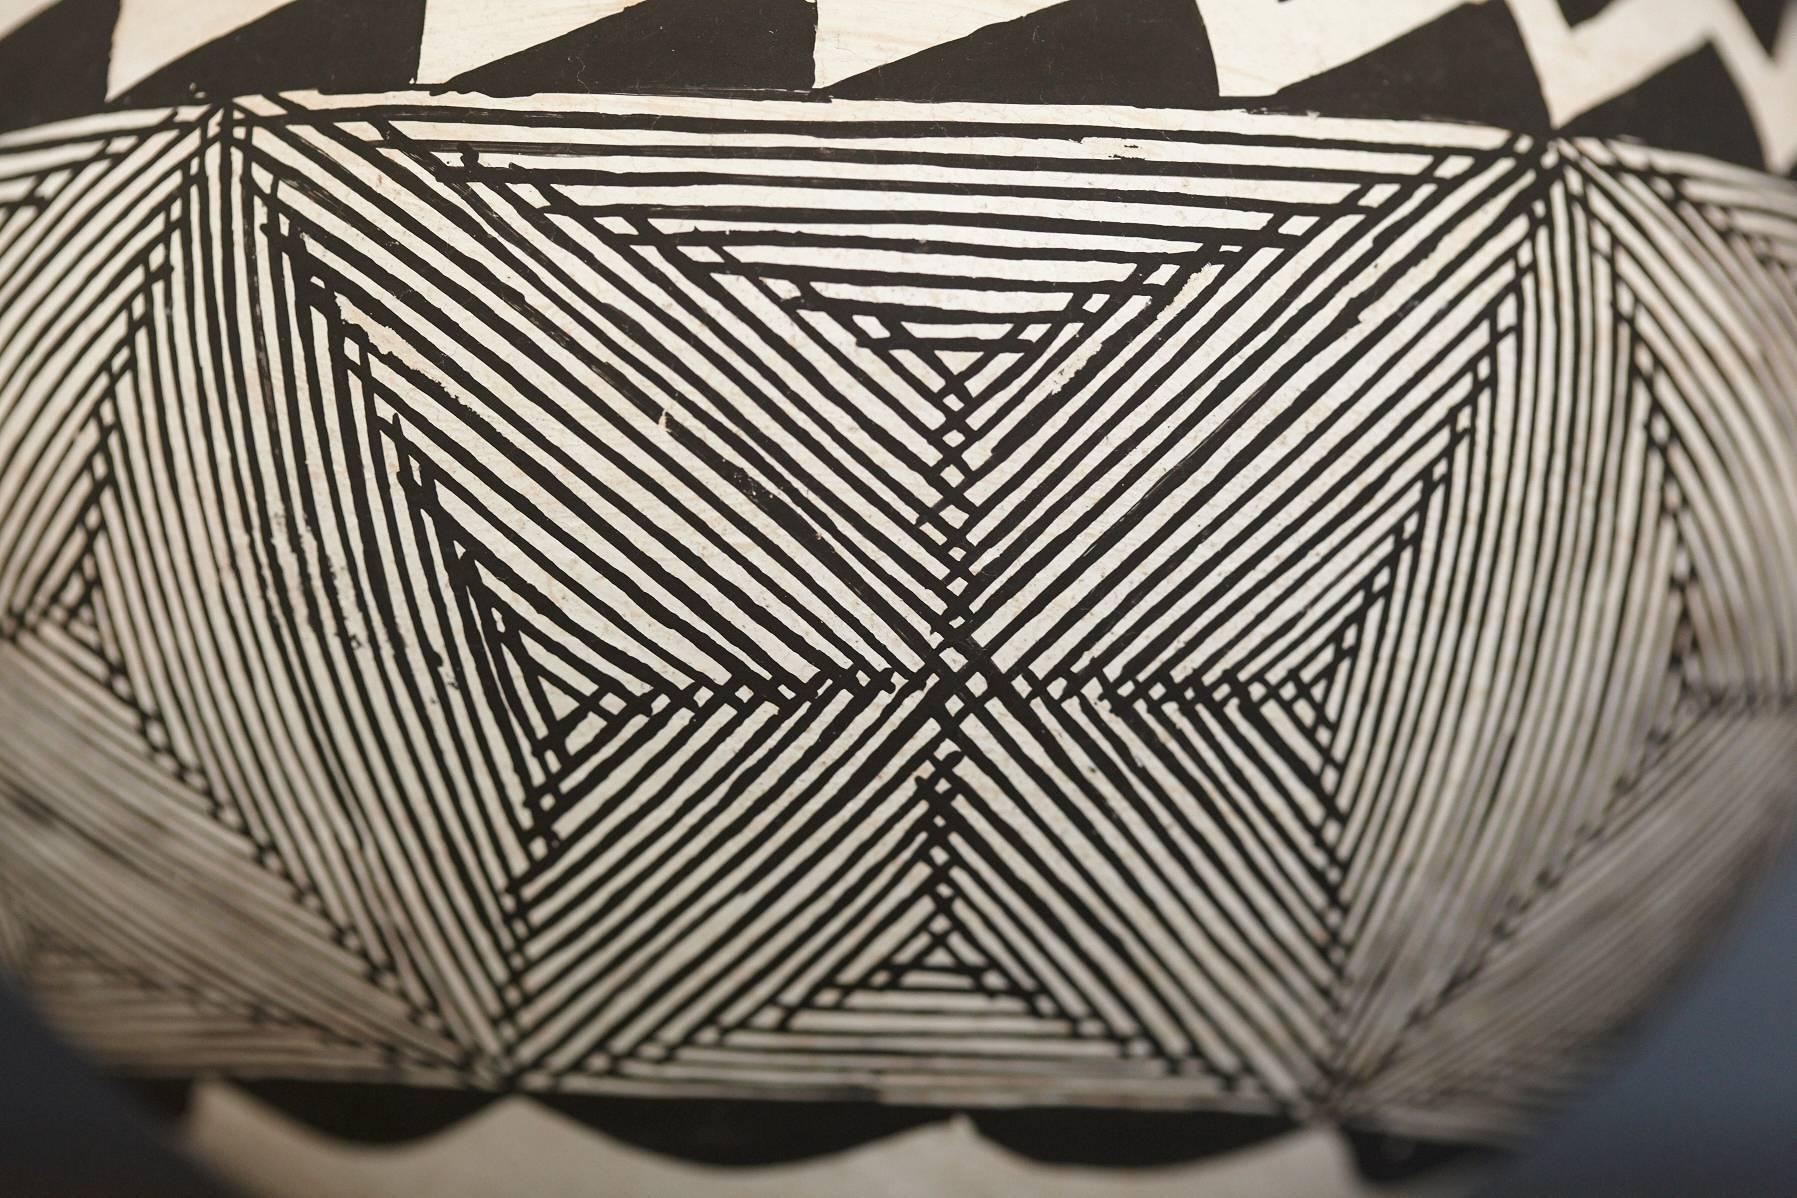 Late 20th Century Native American Acoma Earthenware Bowl, Painted Black and White Graphic Design